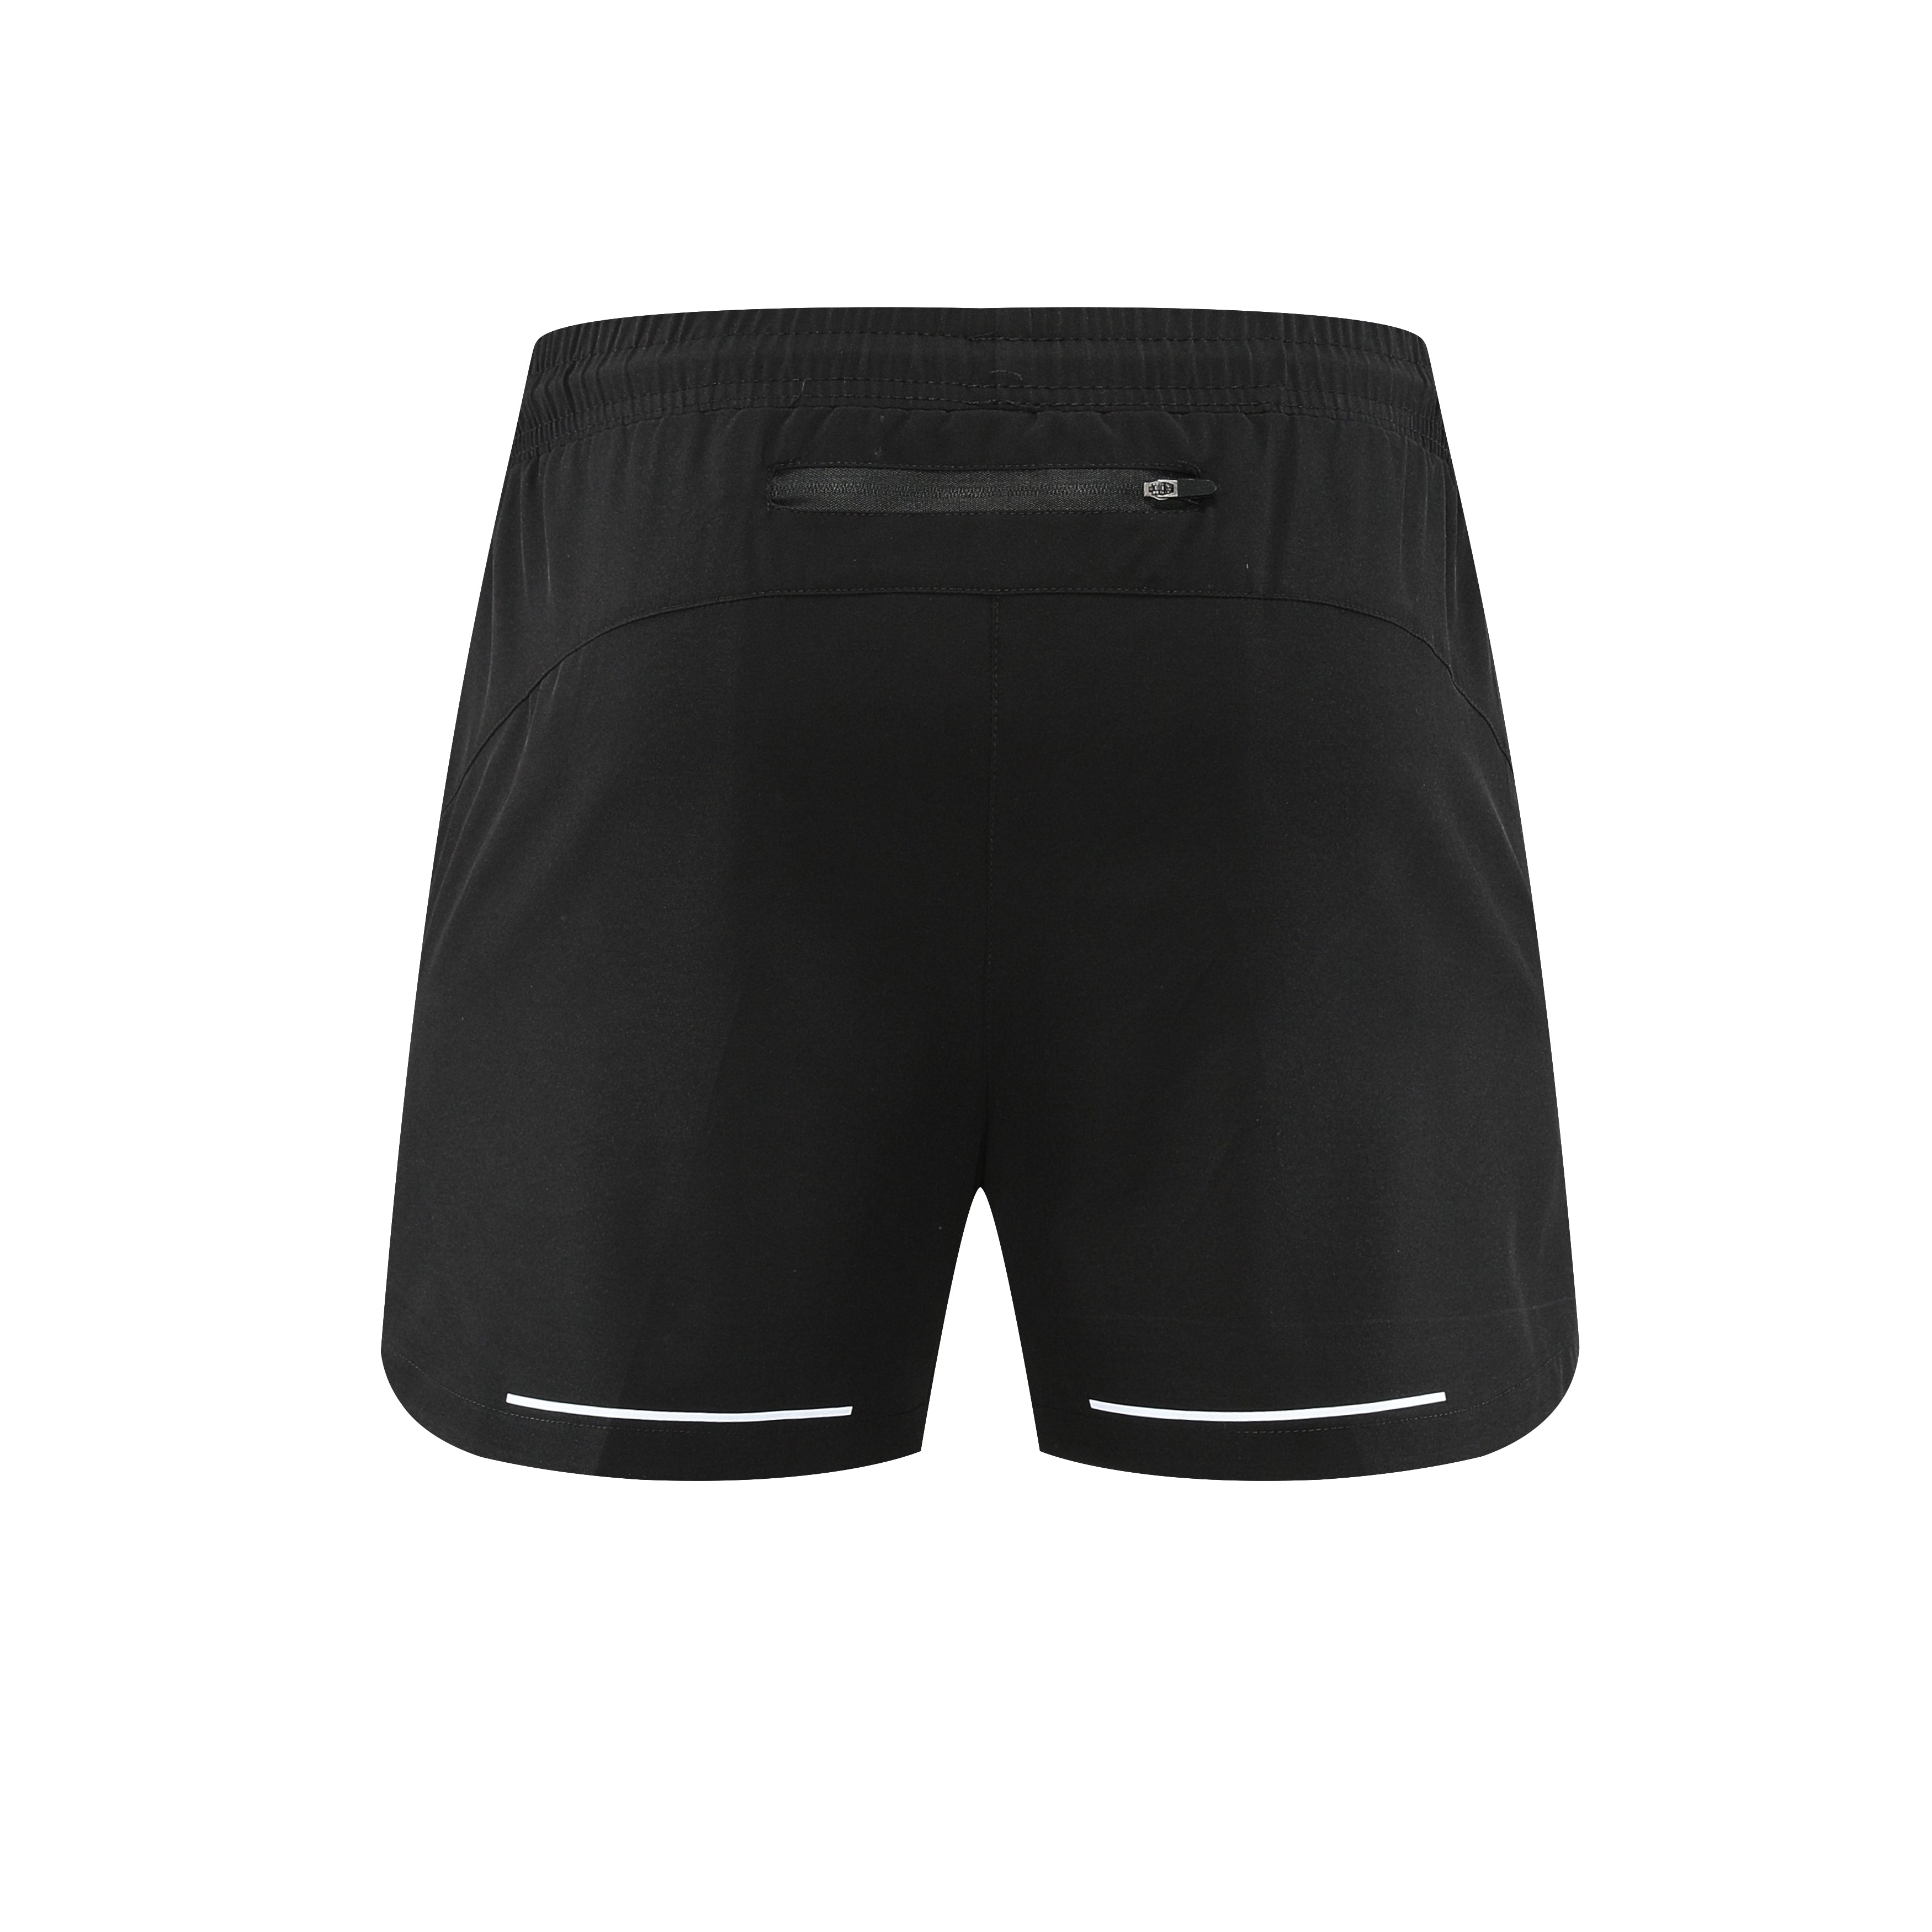 Men's Quick Dry Never Back Down Graphic Shorts